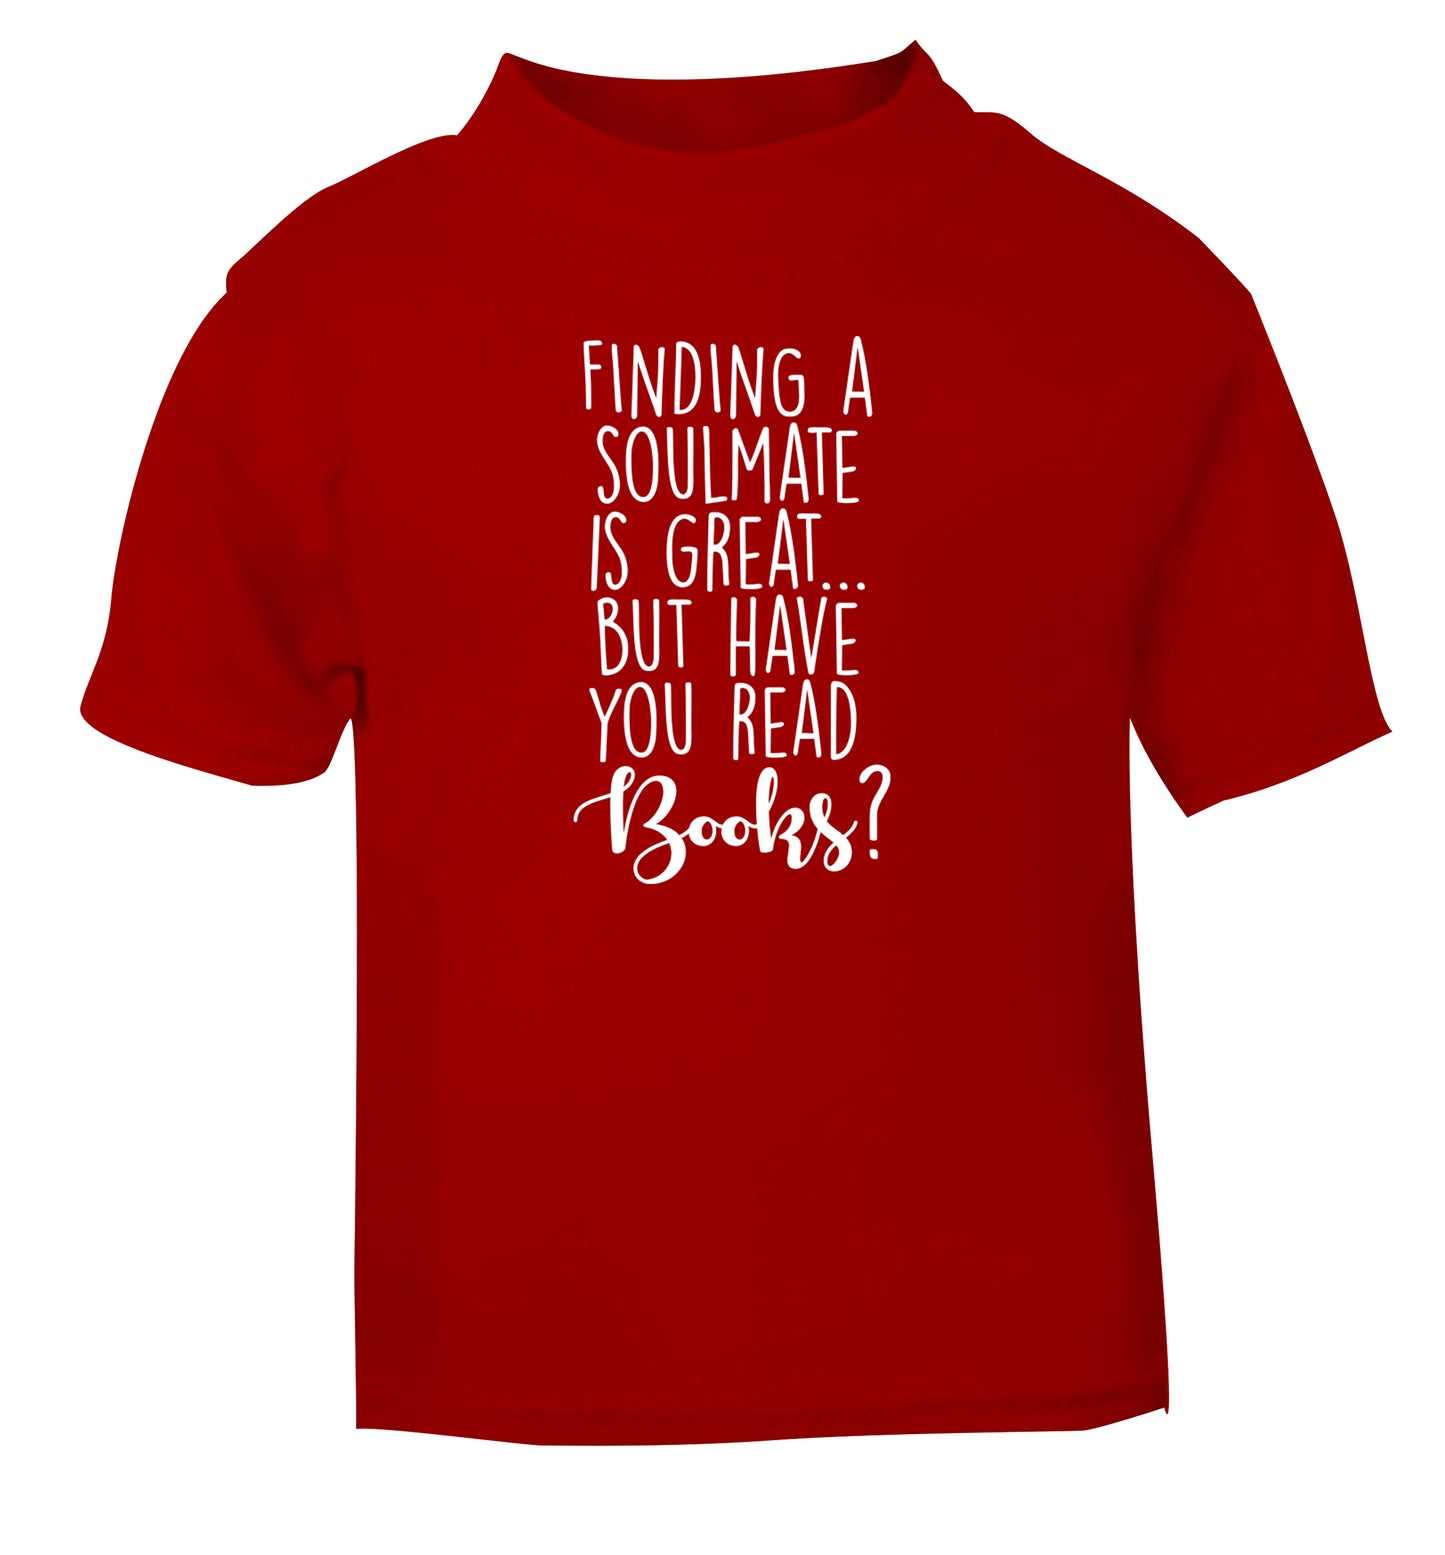 Finding a soulmate is great but have you read books? red Baby Toddler Tshirt 2 Years